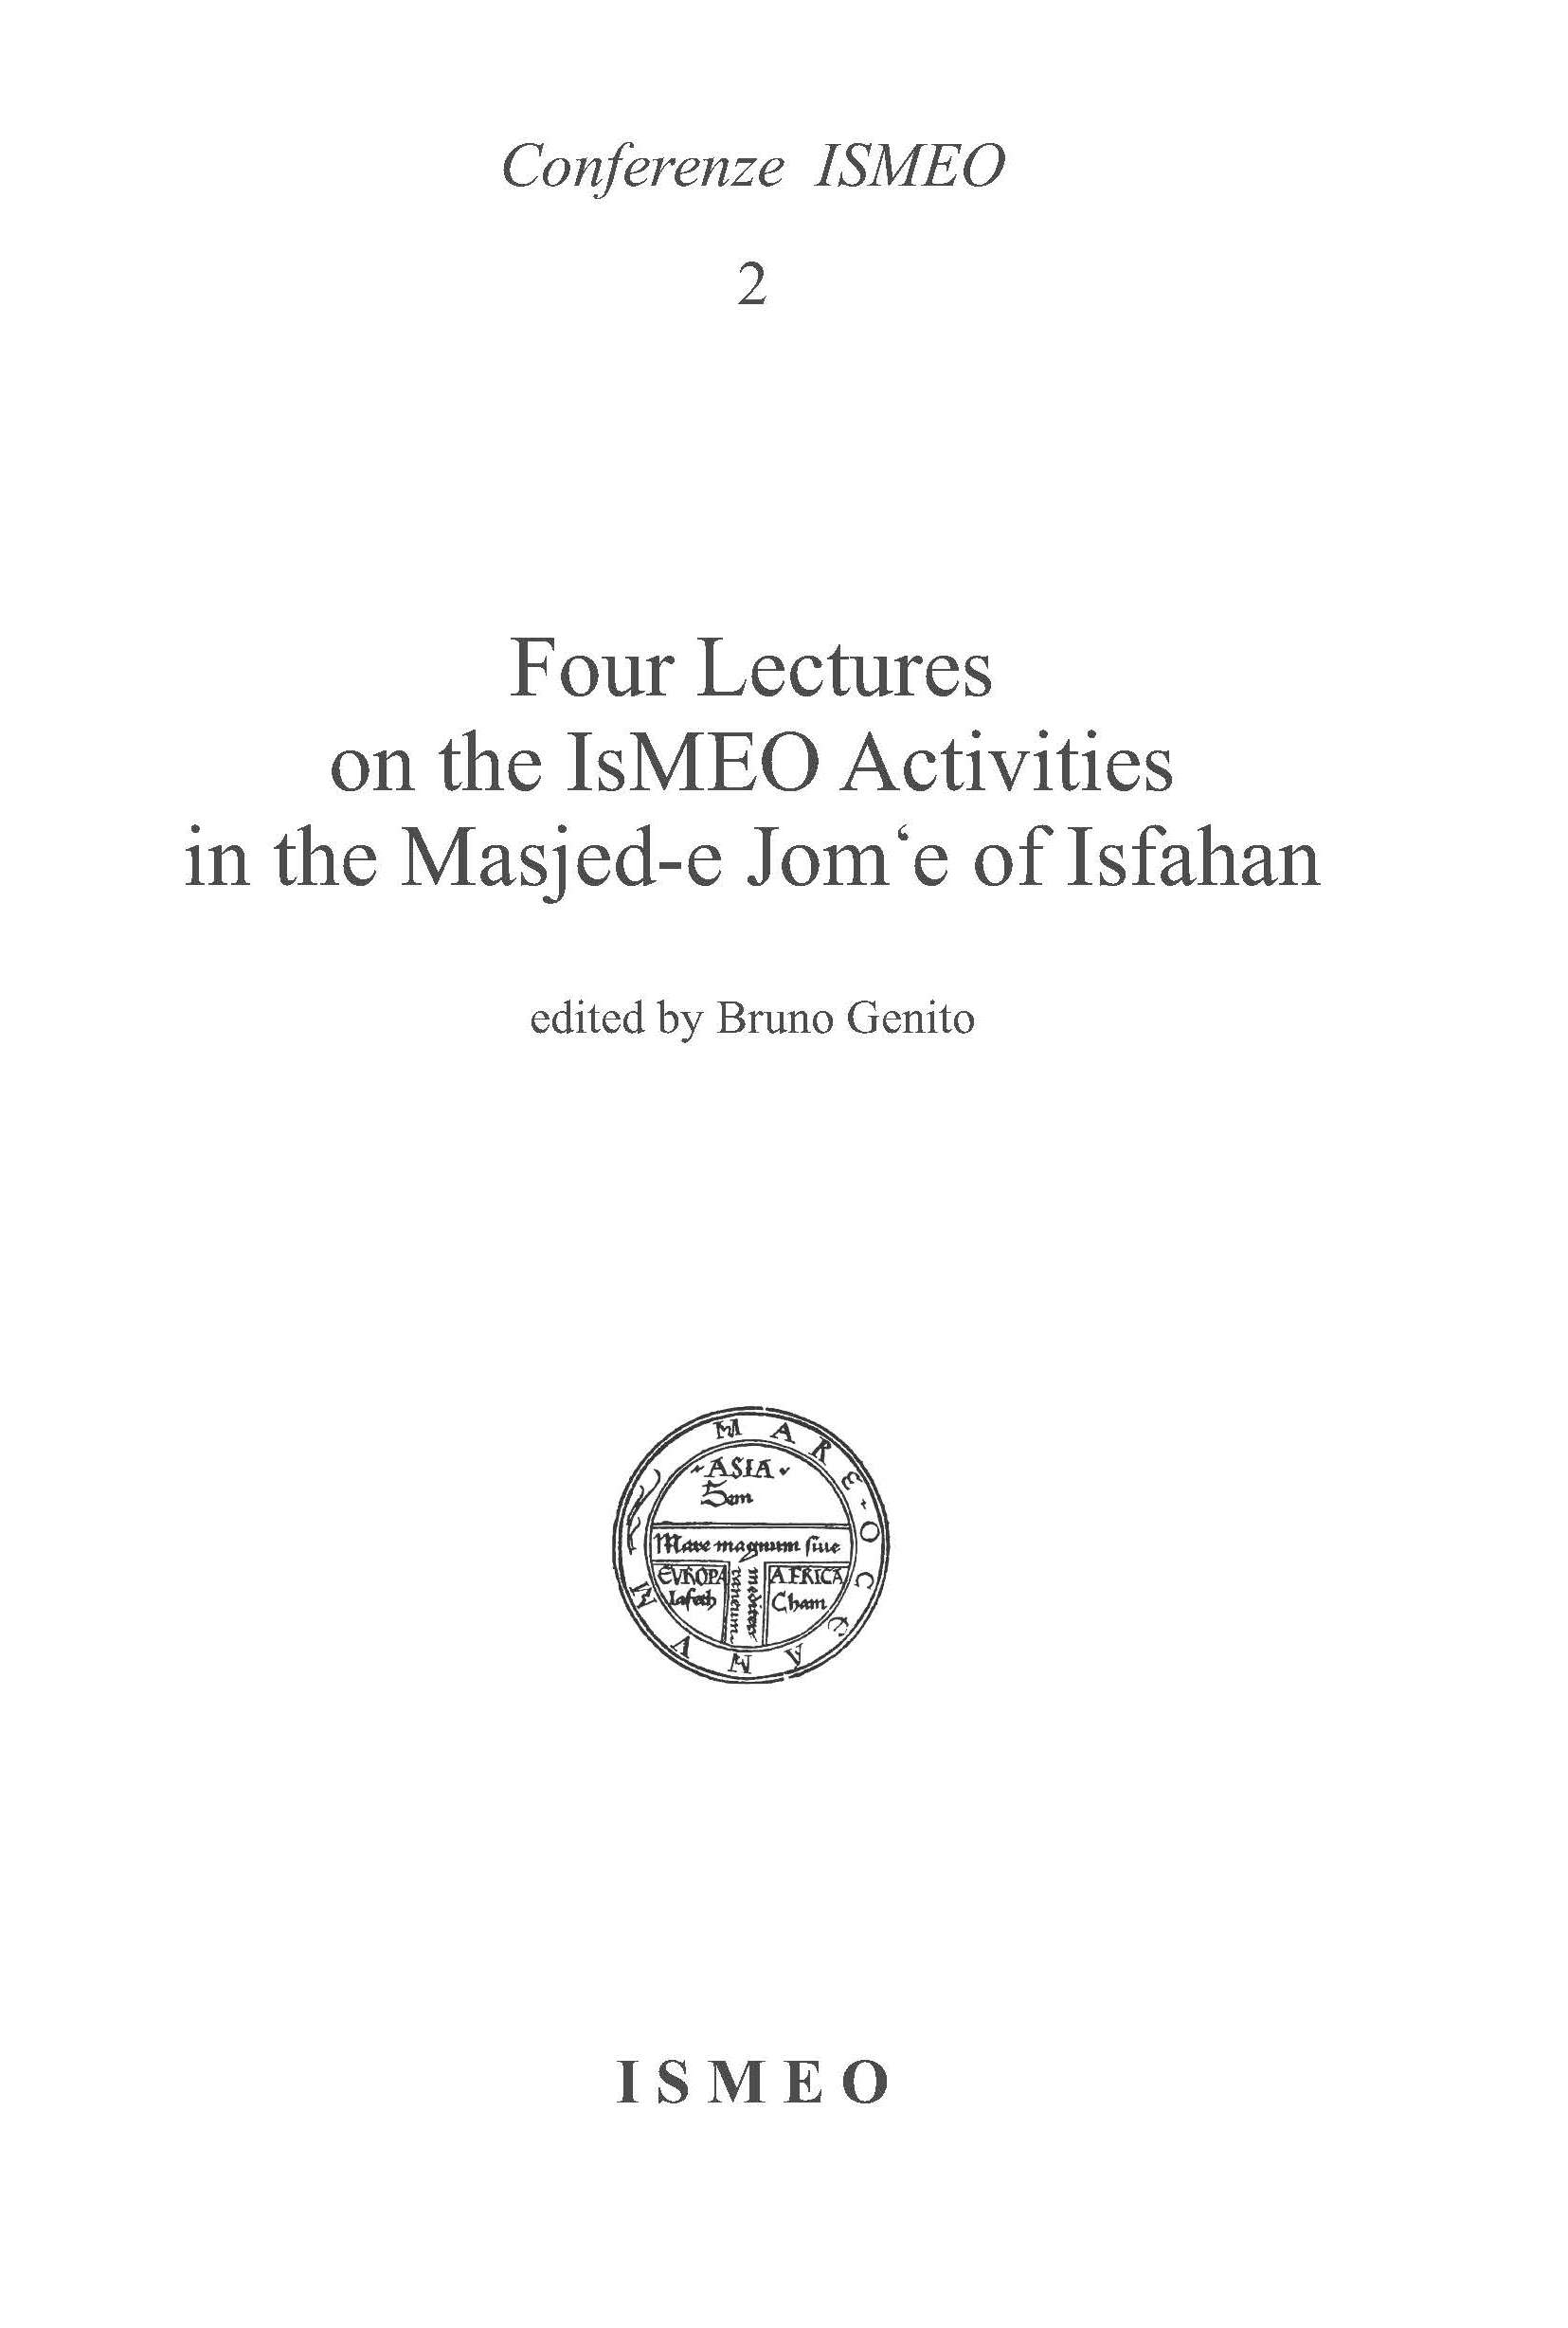 Four Lectures on the ISMEO Activities
in the Masjed-e Jom'e of Isfahan
